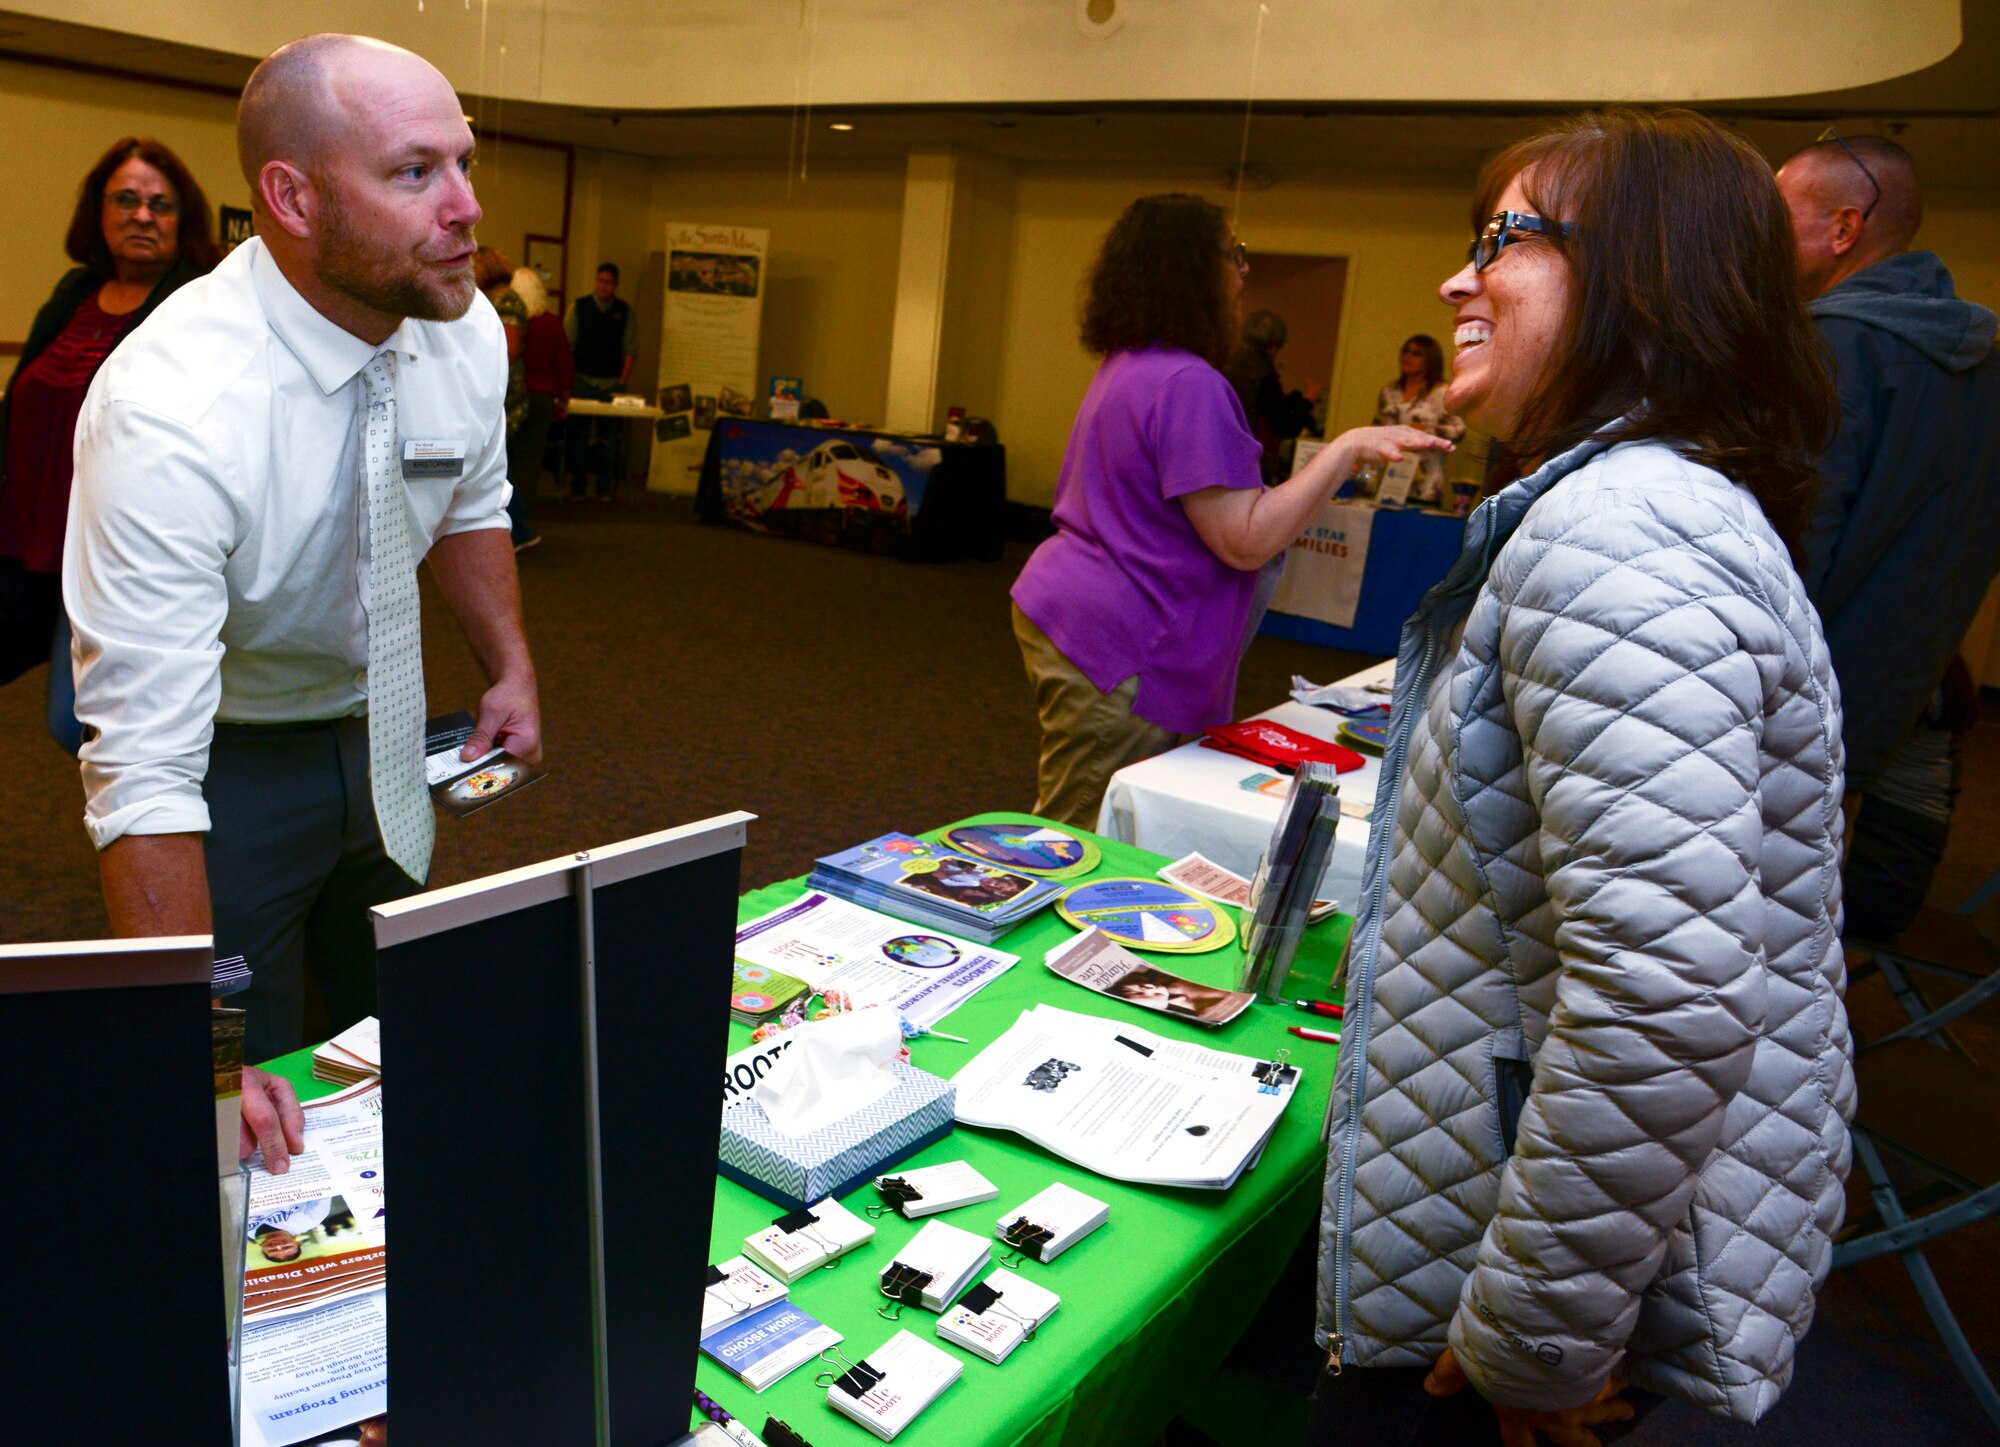 Kristopher Finfrock, New Mexico Workforce Connection Center veterans representative for Albuquerque, receives information about services provided by Life Roots from Jennifer Gutierrez at the Hero Wellness Information Fair Oct. 19, 2018 at Kirtland. The Fair is was put on in conjunction with National Disability Awareness Month.
There were multiple vendors and agencies on site to provide resources and information geared toward disabled, wounded warrior, and special needs families. (U.S. Air Force photo by Jessie Perkins)